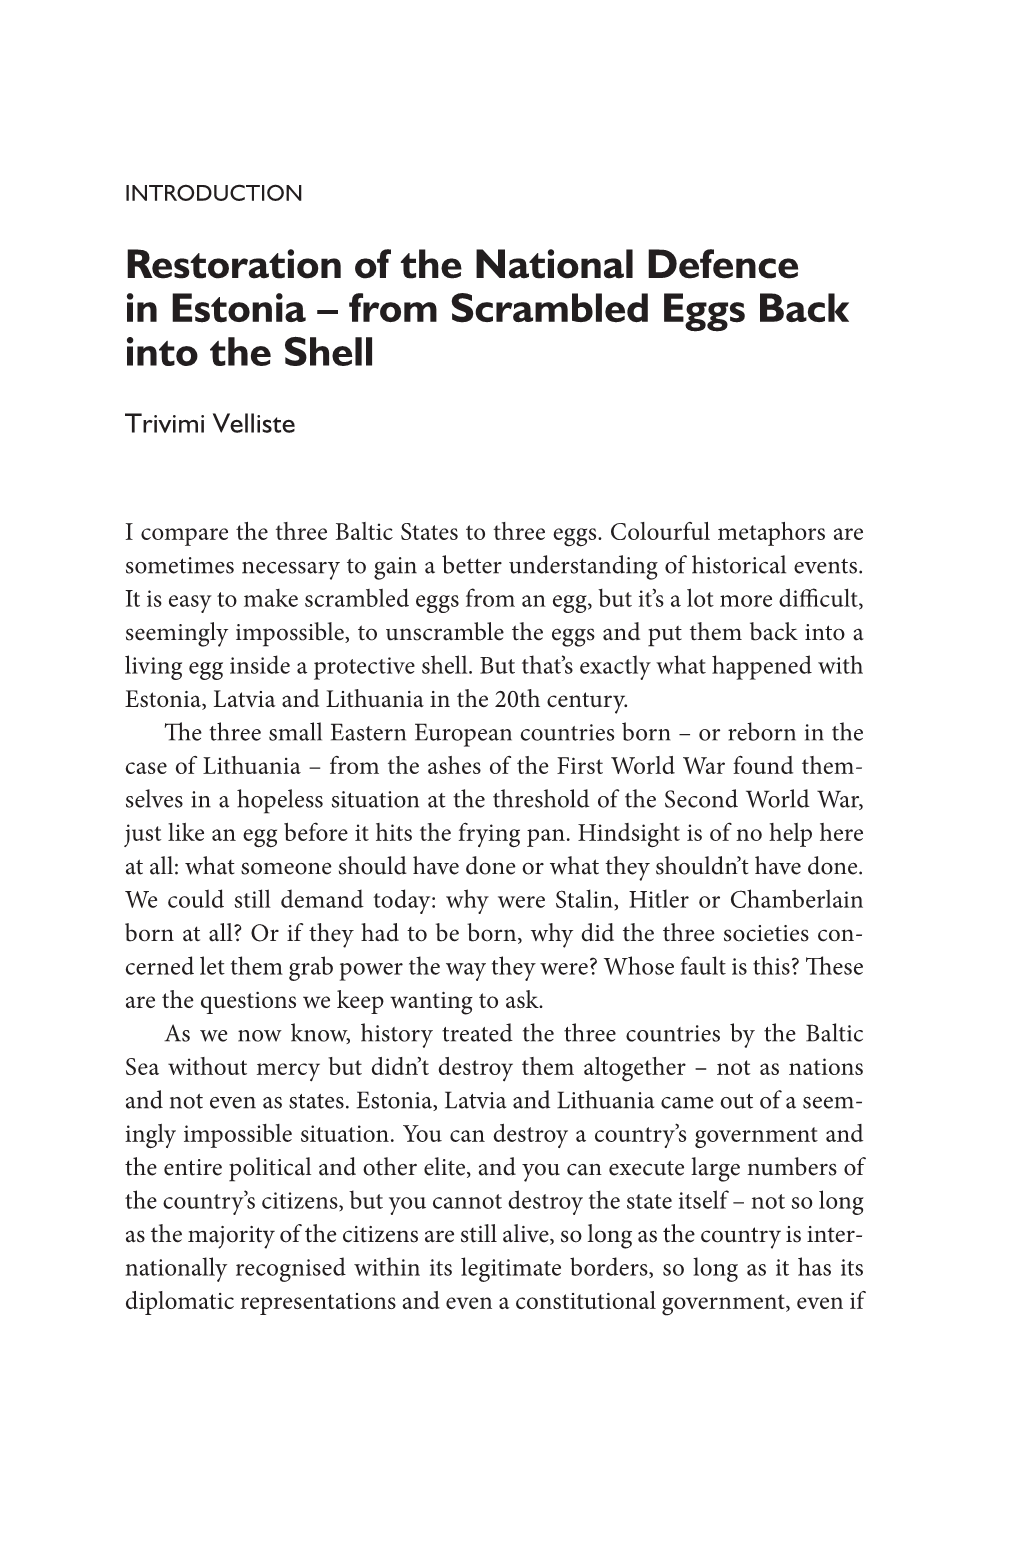 Restoration of the National Defence in Estonia – from Scrambled Eggs Back Into the Shell